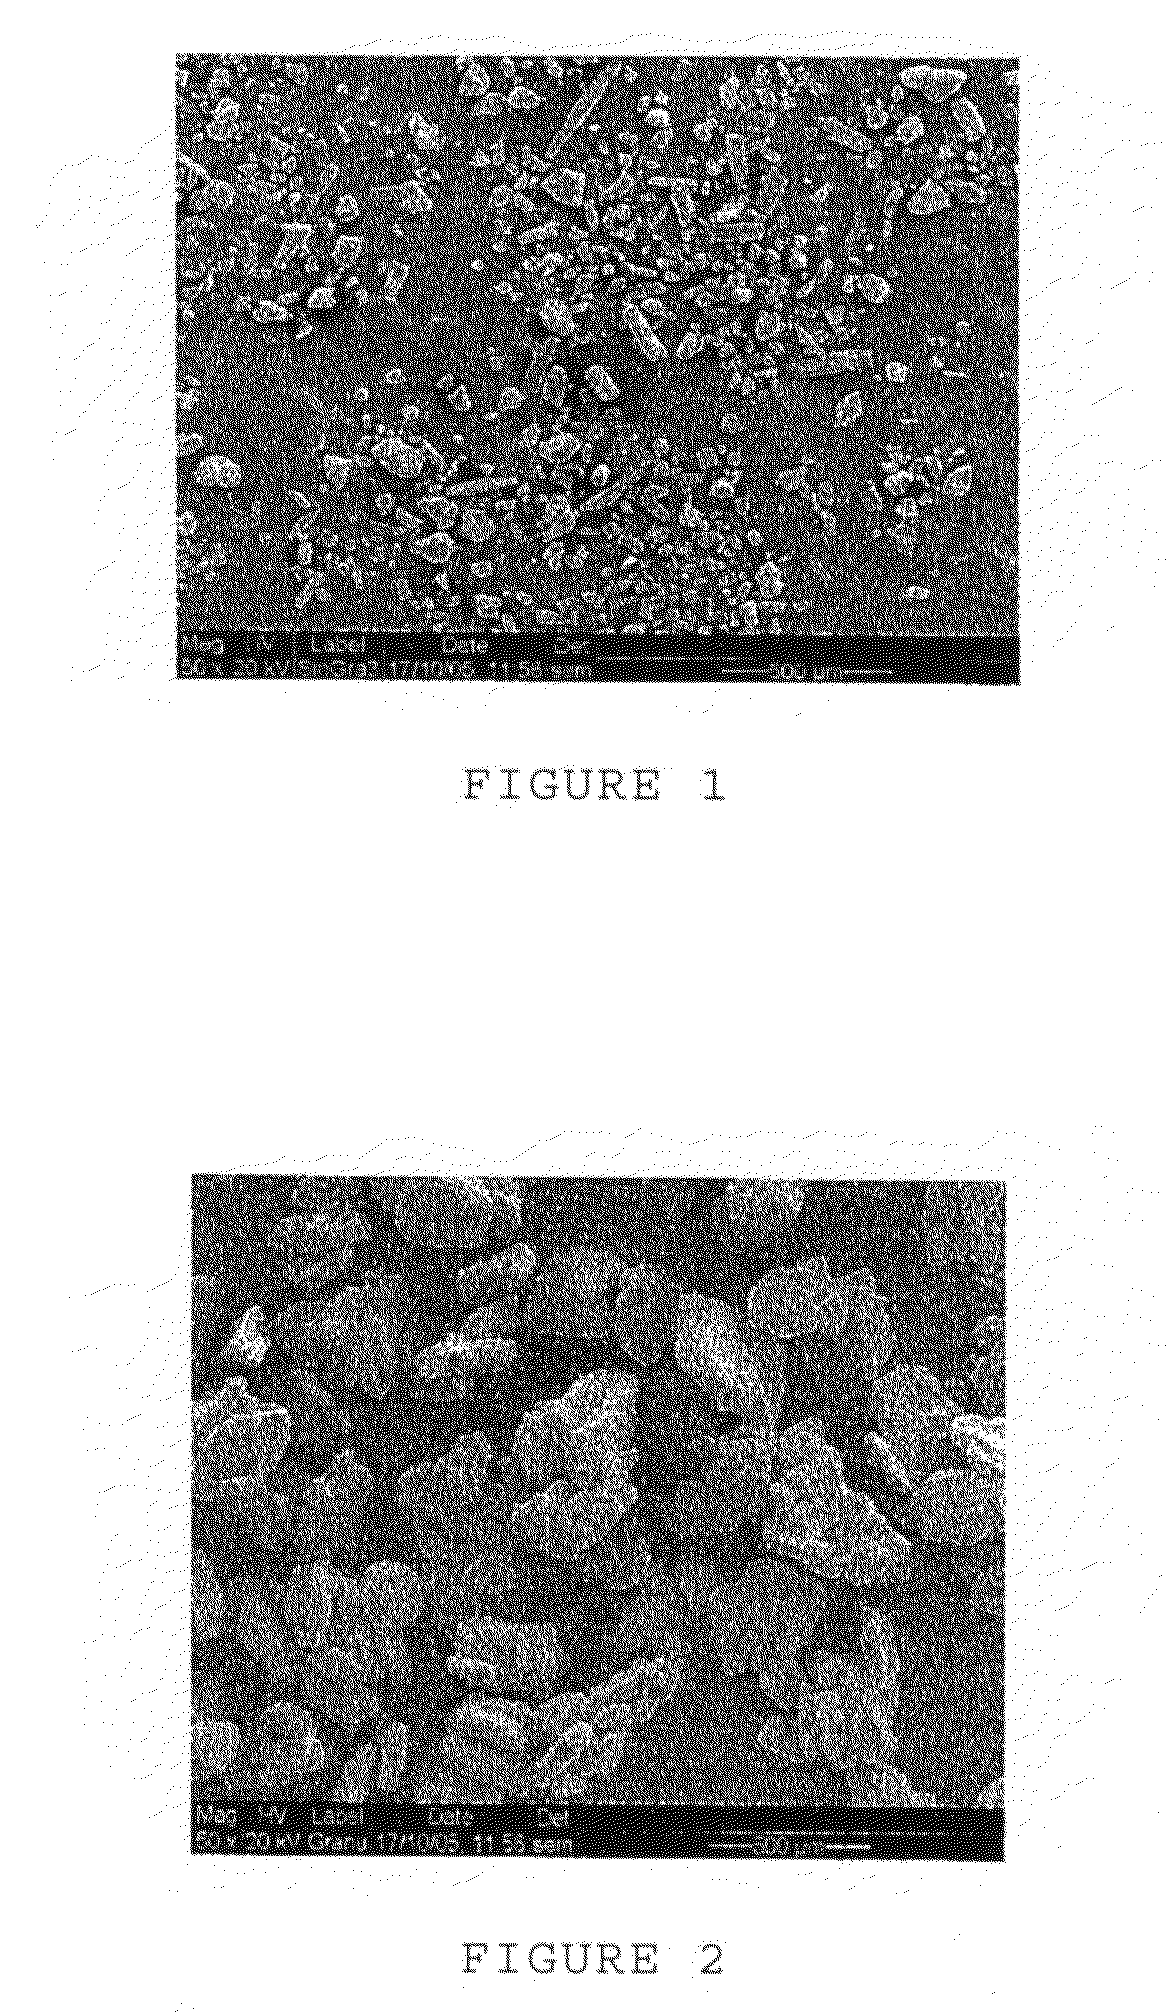 Anti-acid pharmaceutical composition in powder form and process for making it